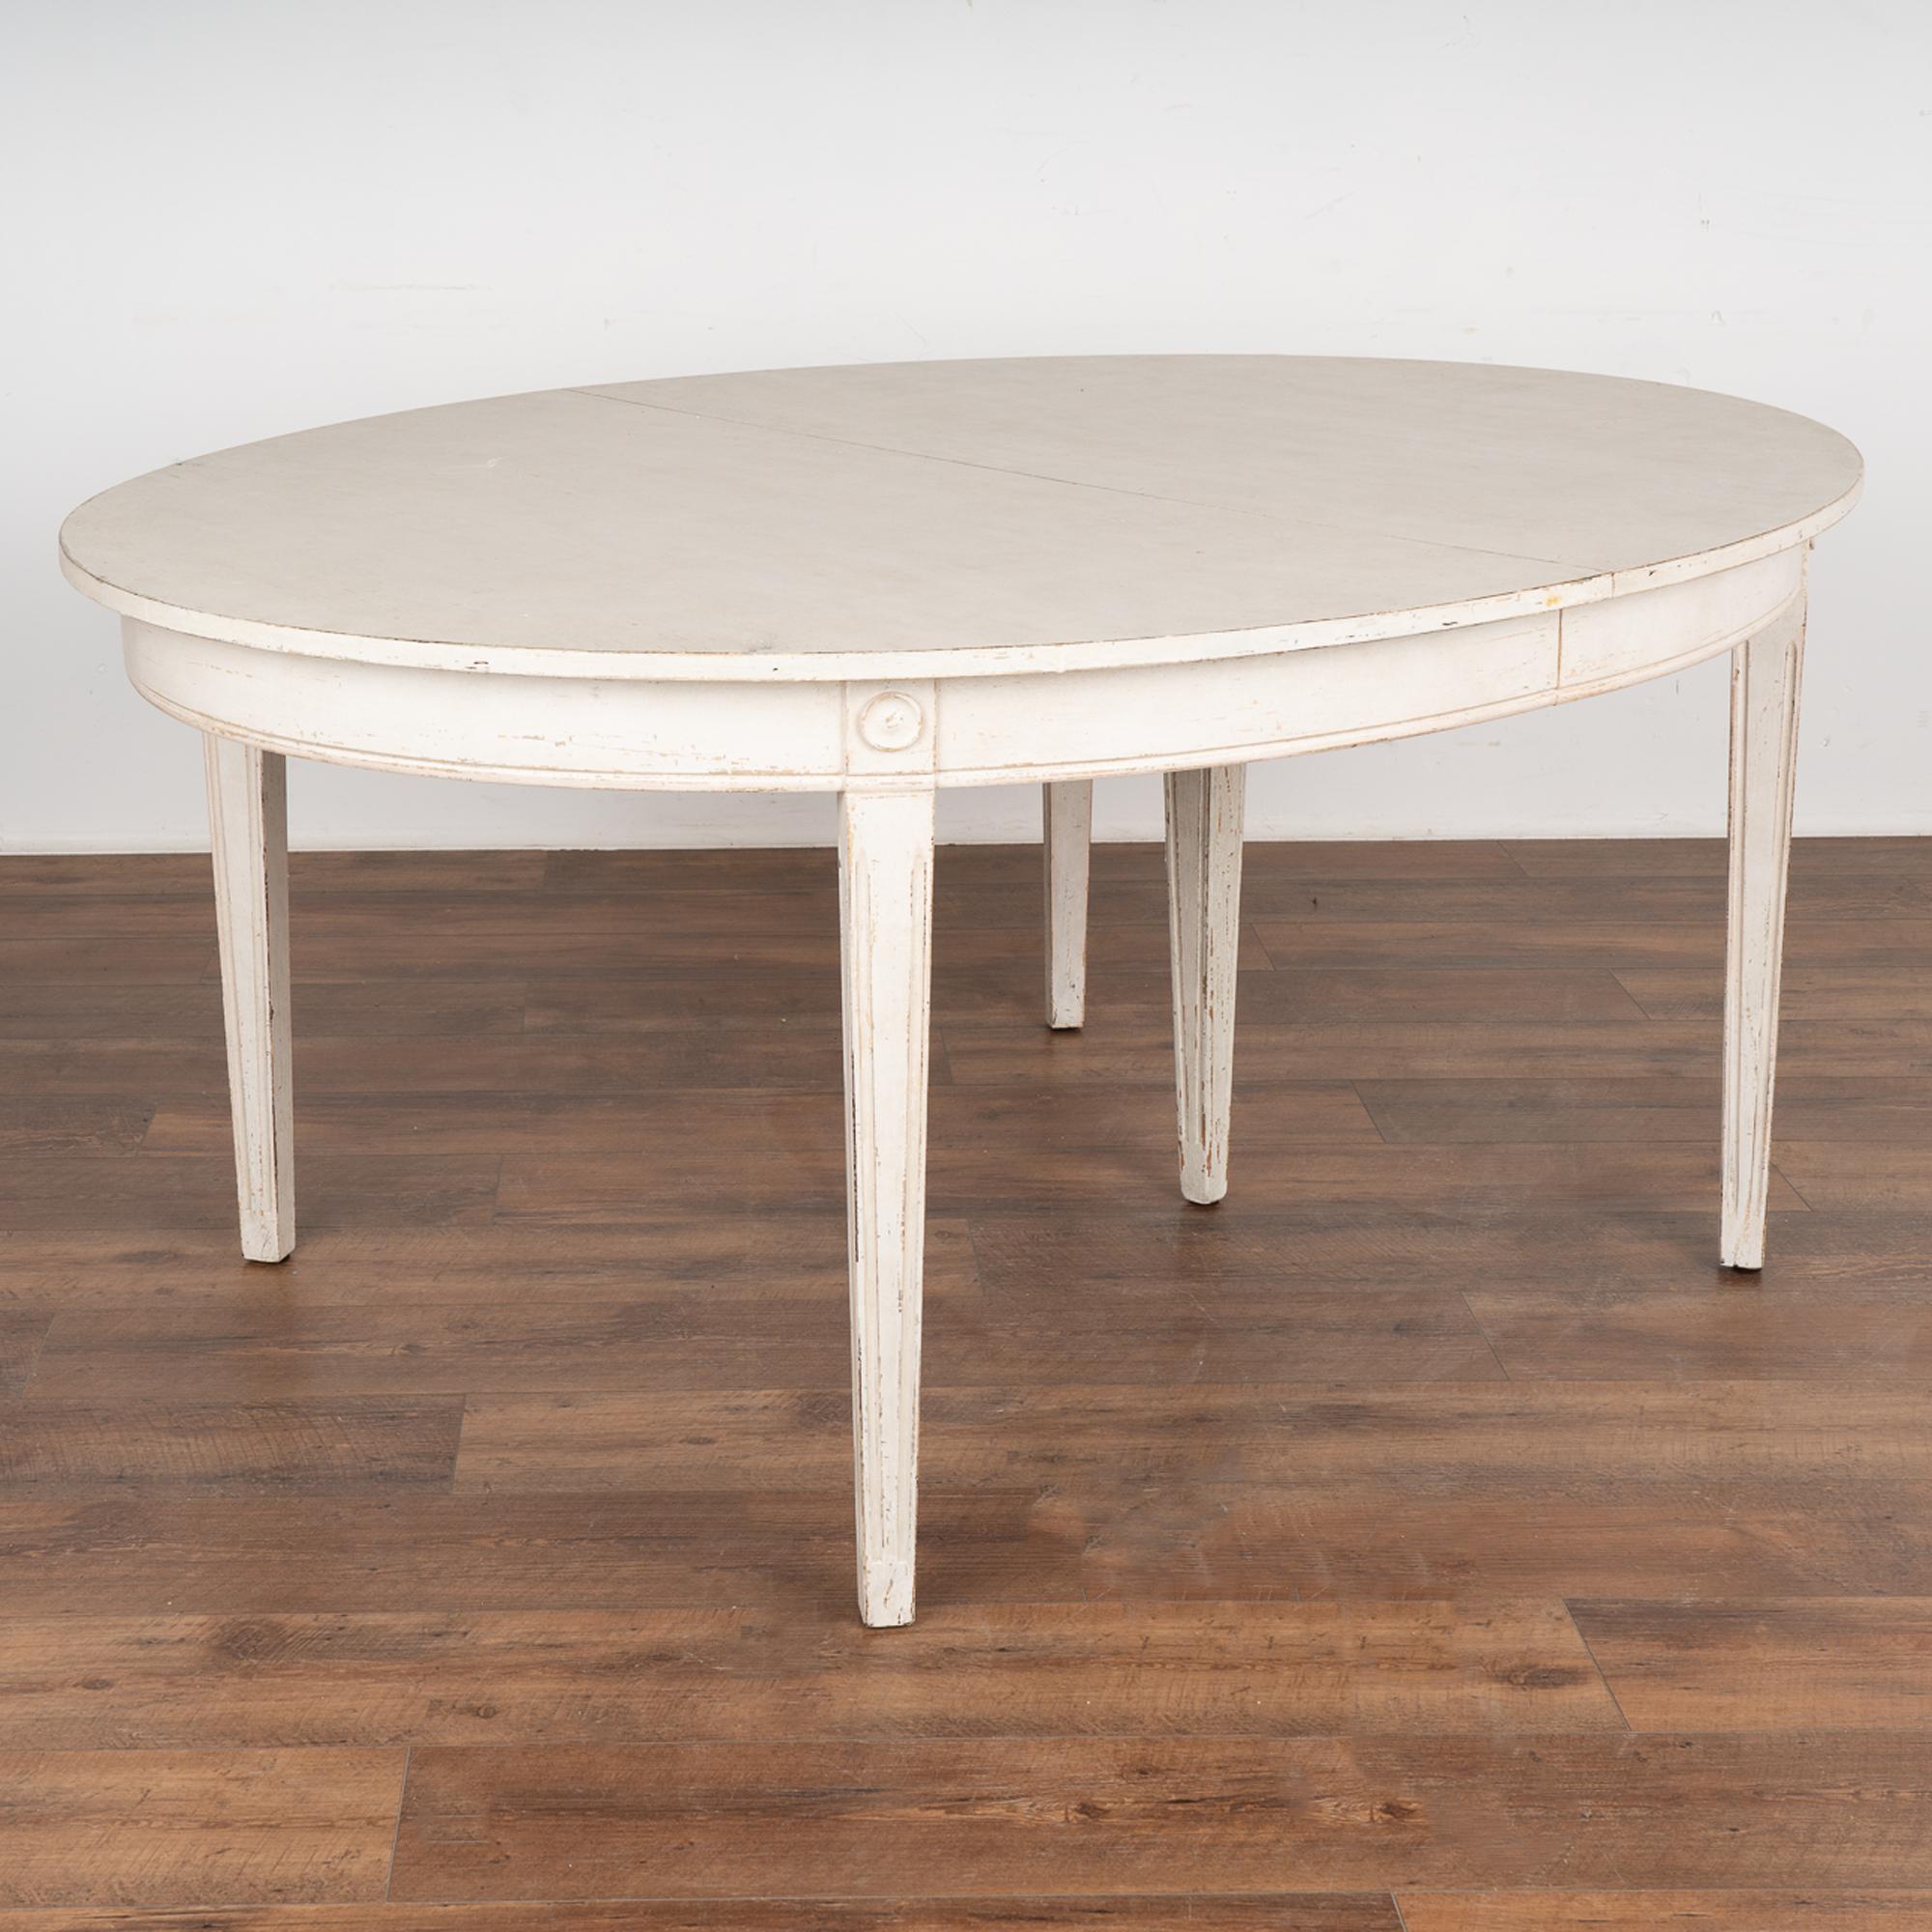 Gustavian White Dining Table With 3 Leaves, Sweden circa 1860-80